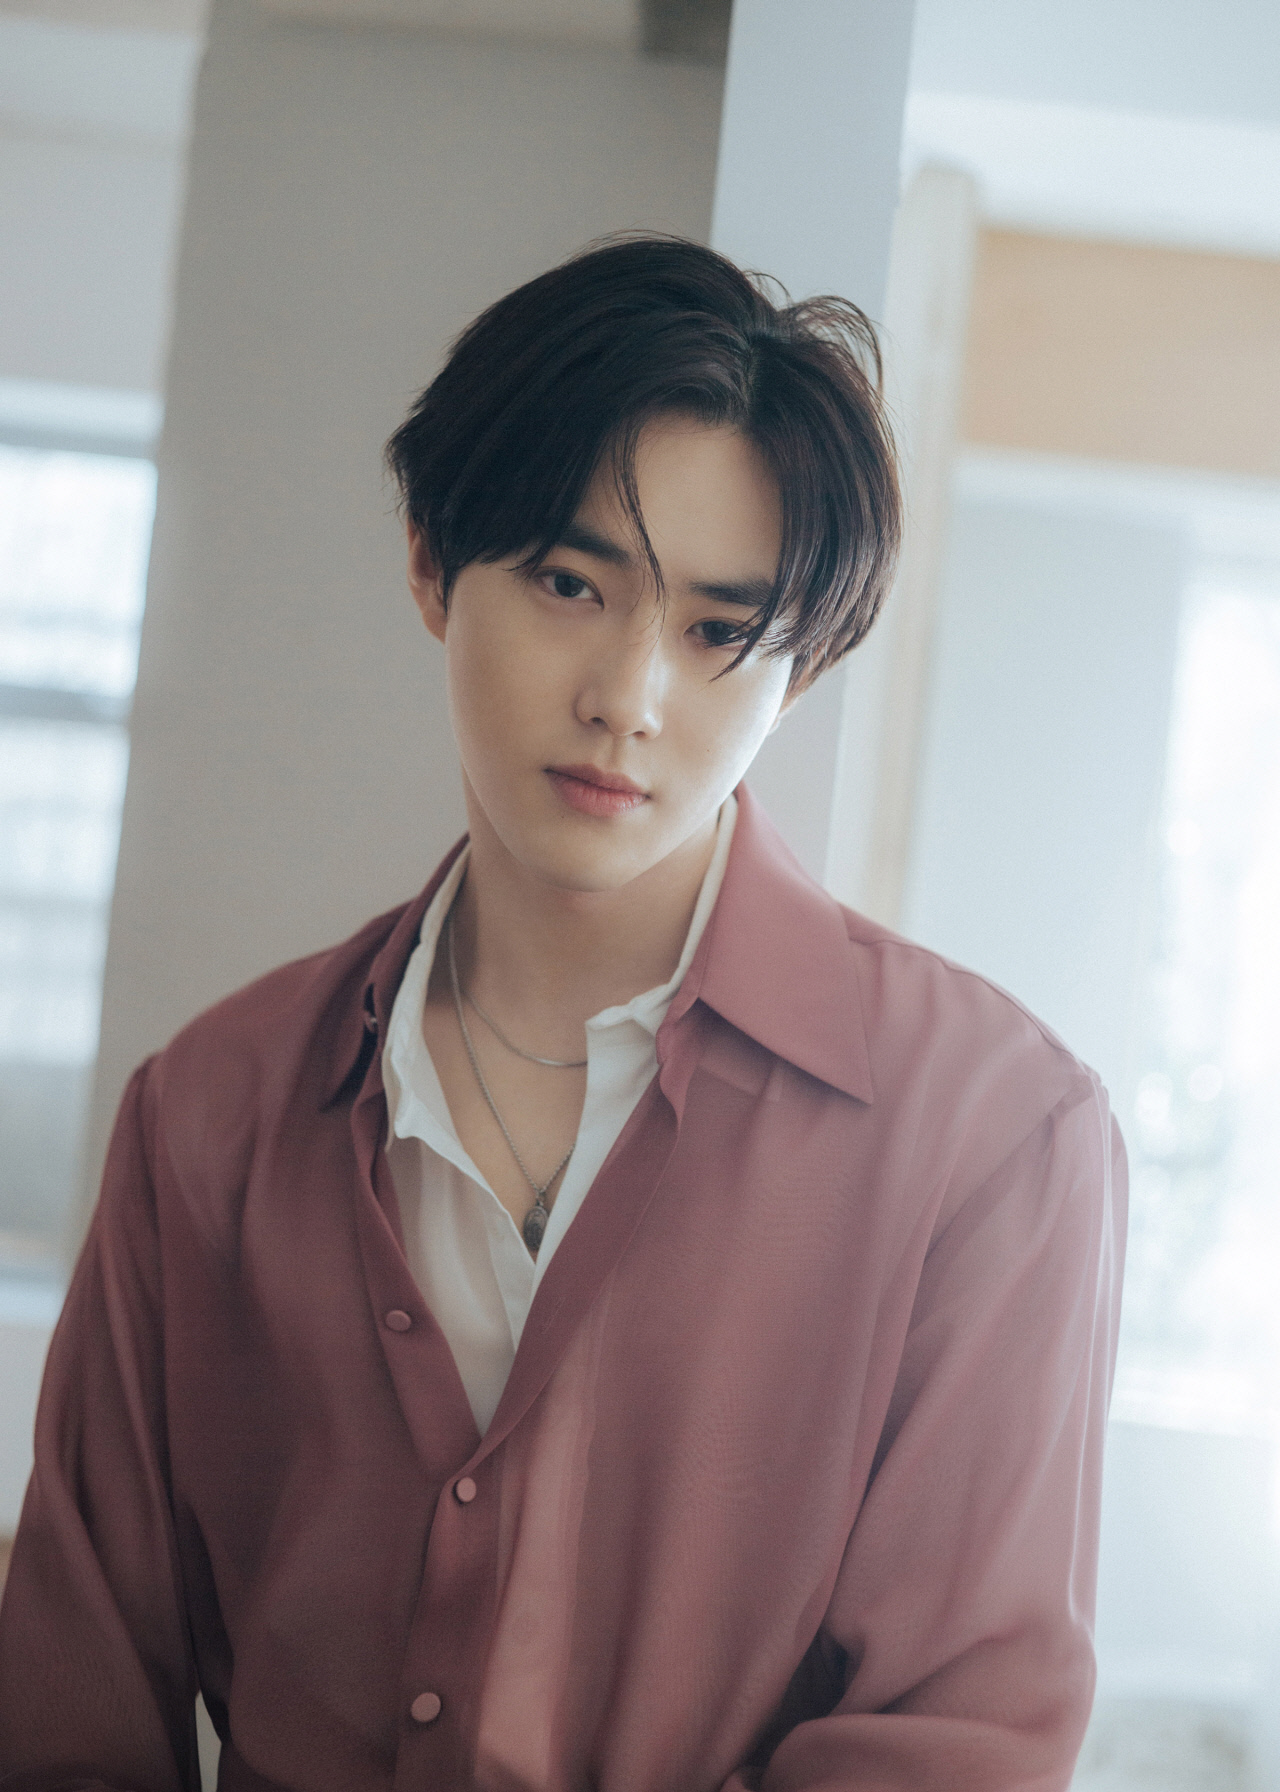 EXO Suho (a member of SM Entertainment) has demonstrated its limited global power at the same time as Solo debut.Suhos first mini-album Self-Portrait, released on the 30th, topped the iTunes top album charts in all 50 World regions including France, Finland, Sweden, the United Arab Emirates, Saudi Arabia, India, Argentina, Brazil, Greece, Hong Kong, Russia, Belarus and Singapore.In addition, this album ranked first in various music charts such as Hanter chart, Shinnara record, Kyobo Bookstore, Yes24, Aladdin, as well as the digital album sales chart in Chinas largest music site QQ music, Cougu Music and Couer Music. The title song Love, Lets Love also was released at 6 pm on the 30th. It confirmed Suhos explosive popularity by climbing to the top of the major music charts in real time.Suhos first mini-album, Self-Portrait, includes the title songs of modern rock genres, Love, Lets Love, O2, Made In You, Starry Night, Self-Portrait, Your Turn (About) For You Now) and six songs in a lyrical atmosphere are being recorded and getting a good response.Suho will appear on MBC FM4Us Noon Hope Song Kim Shin-young, which will air today (31st) at 12 p.m.